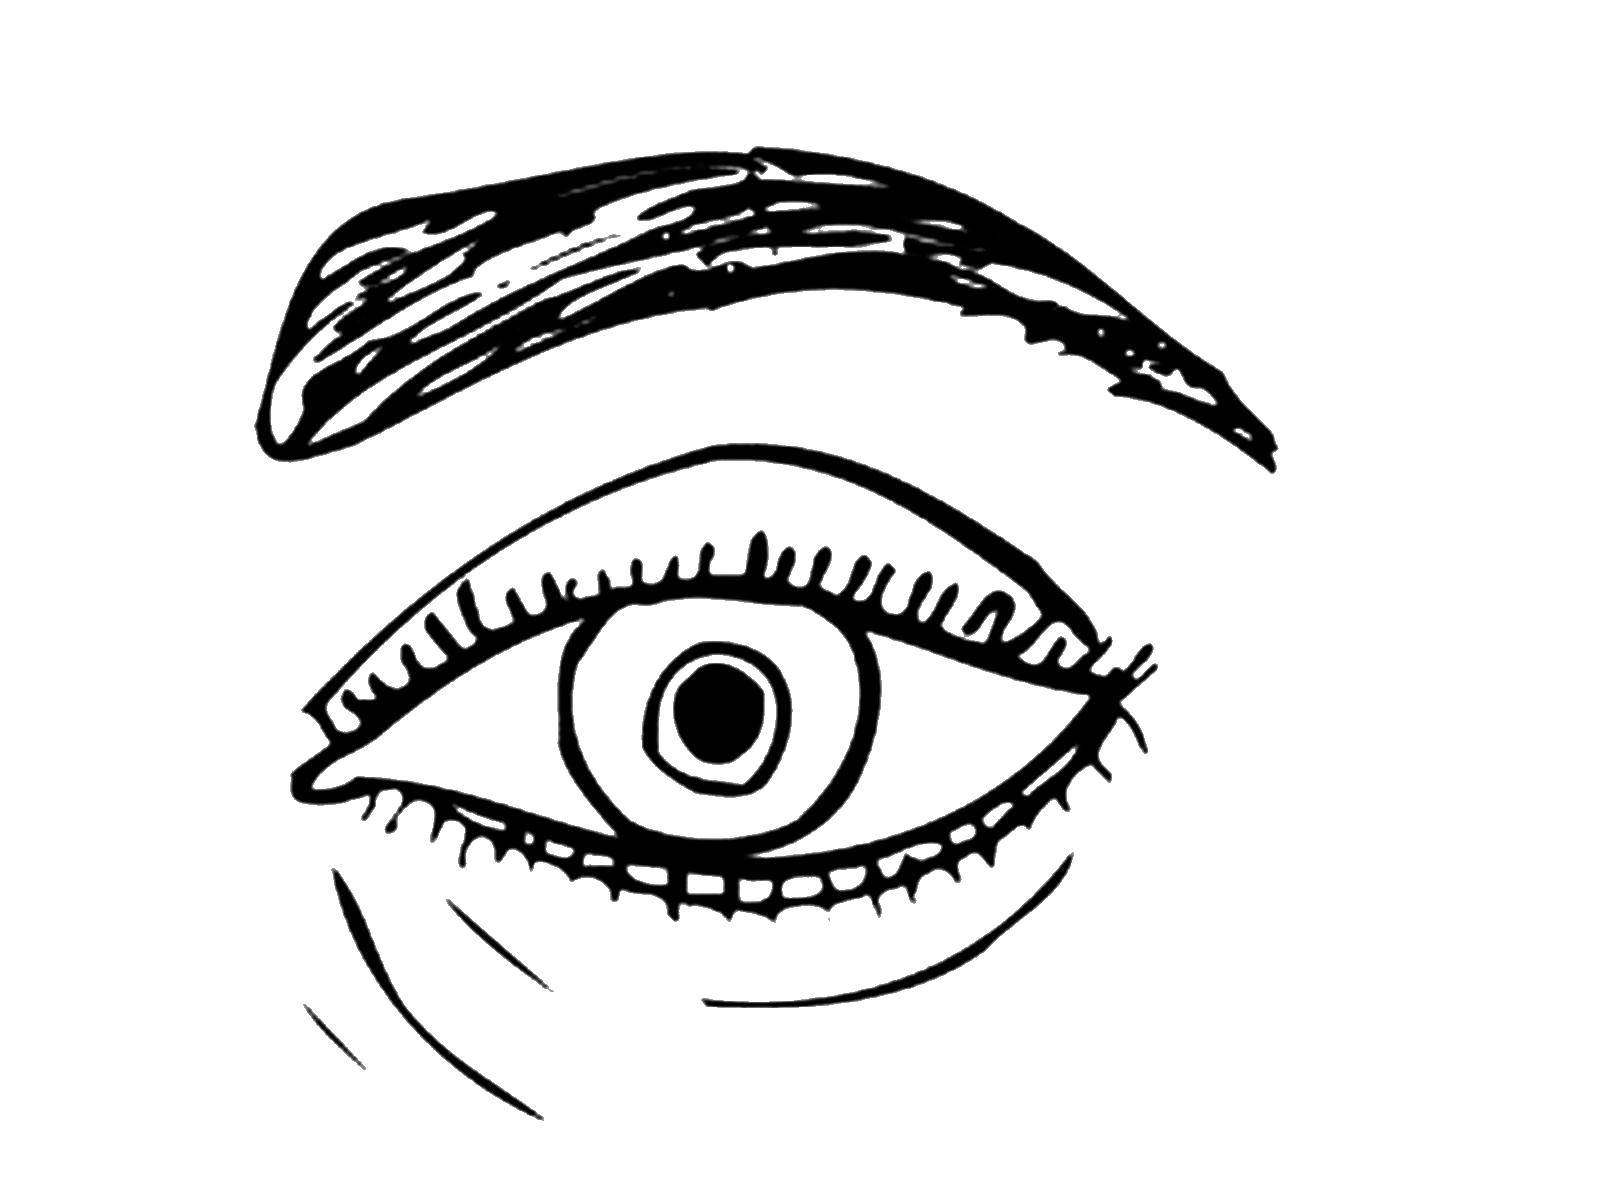 Coloring Eyes. Category The structure of the body. Tags:  Eyes.